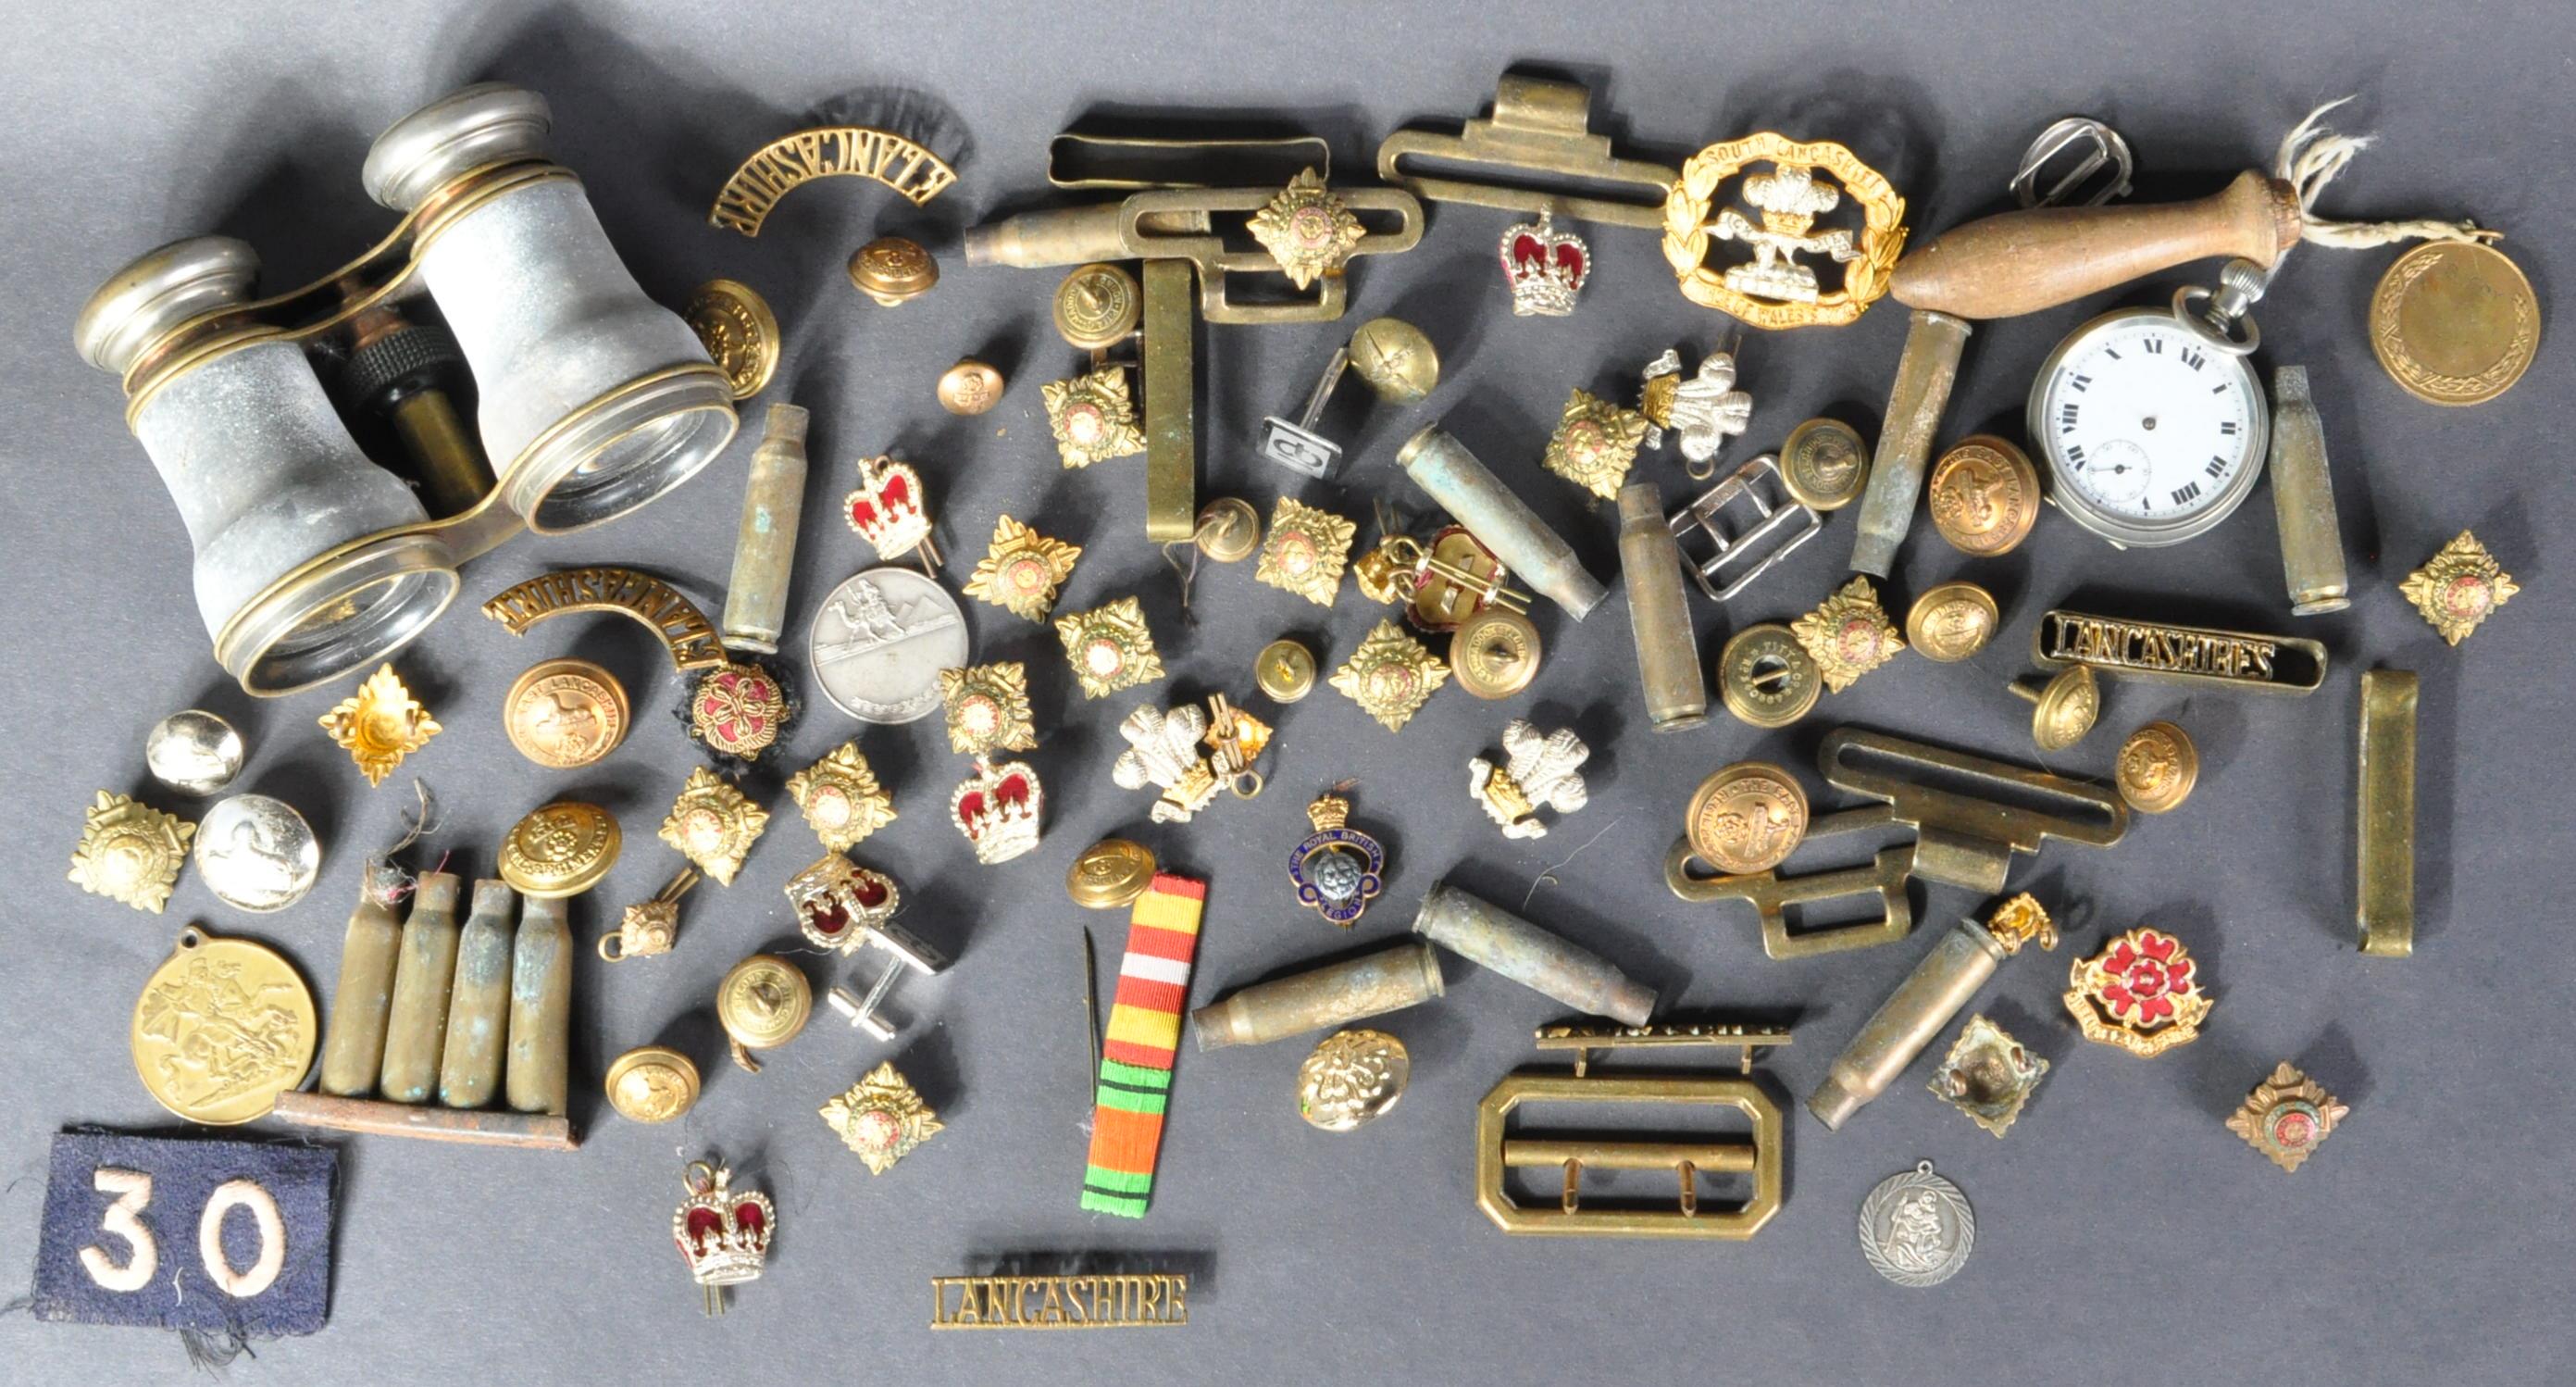 COLLECTION OF ASSORTED MILITARY RELATED ITEMS - BUTTONS, BADGES ETC